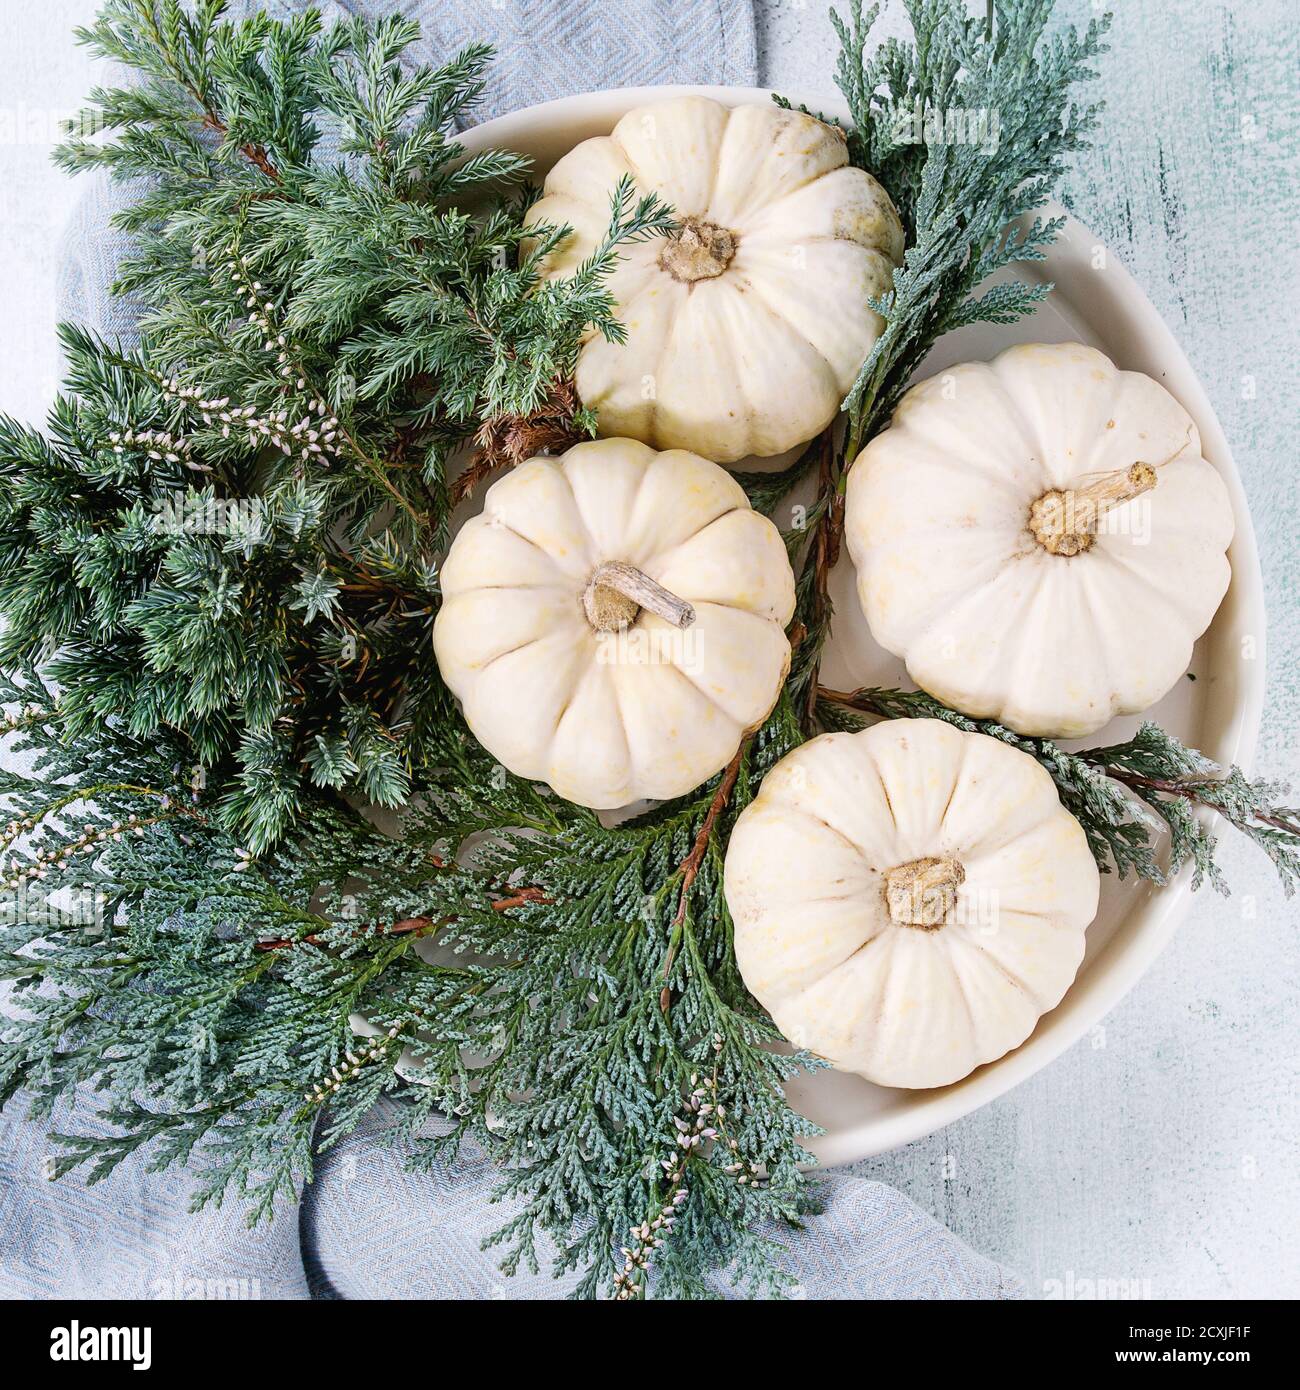 Holiday table decoration with white decorative pumpkins and thuja branches on blue textile napkin over white wooden background. Top view. Square image Stock Photo